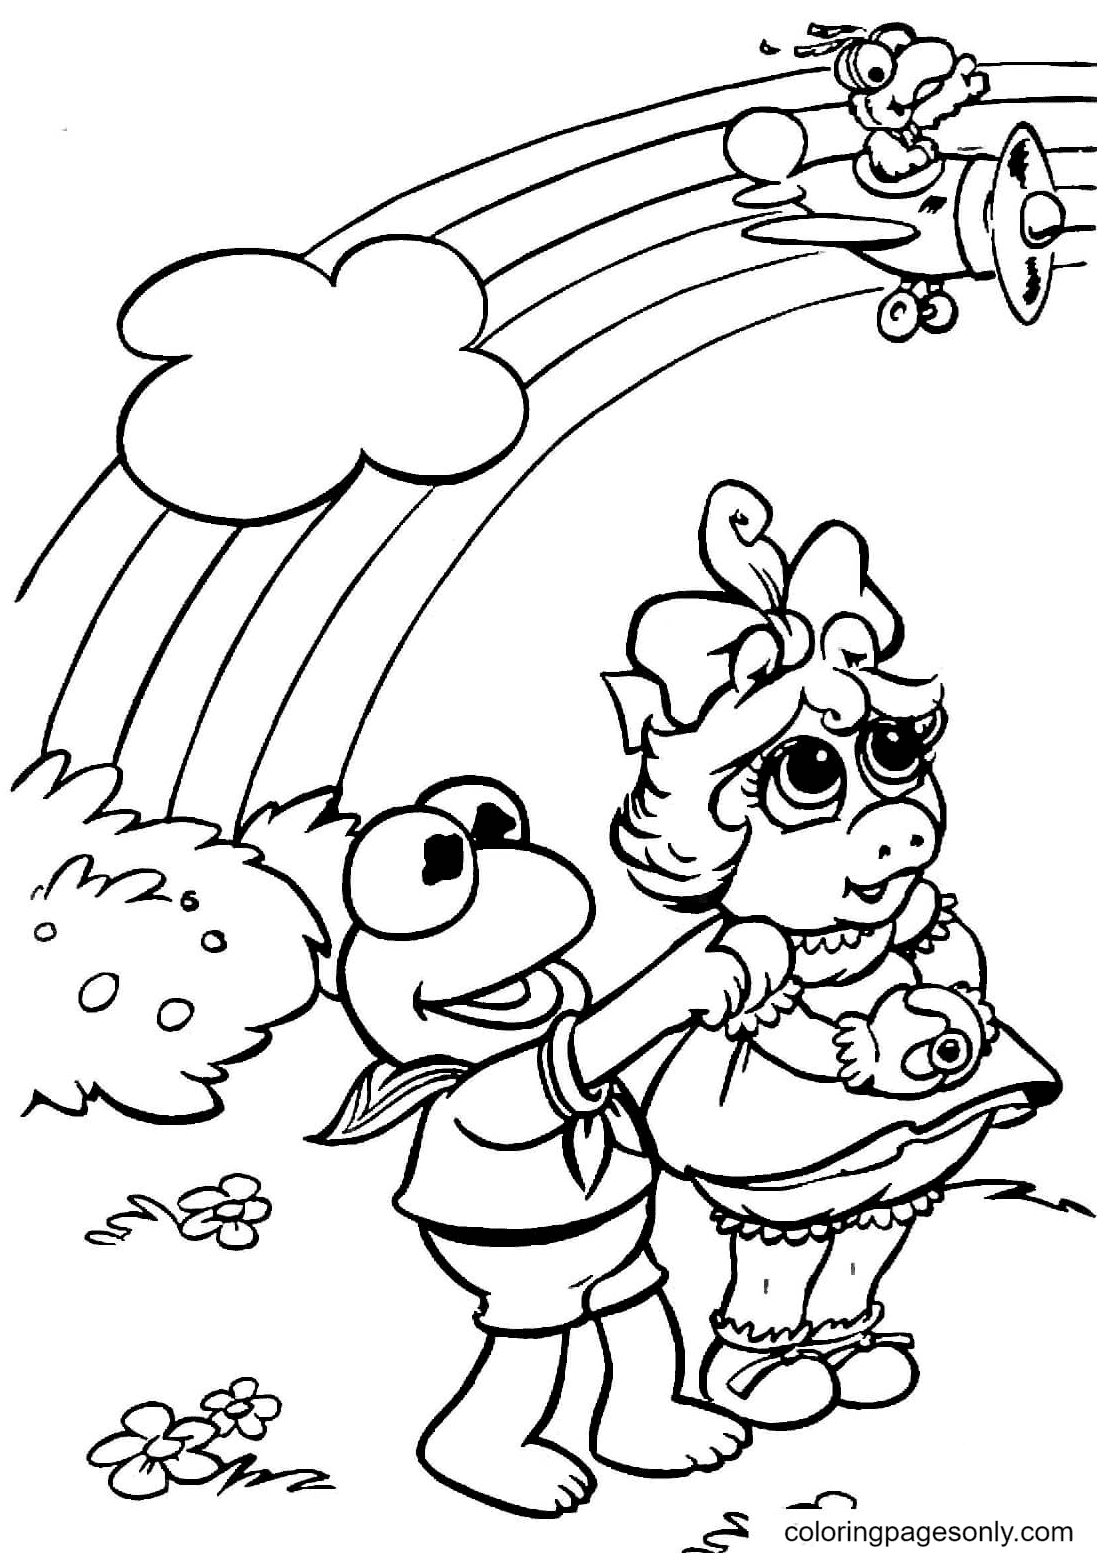 Kermit, Miss Piggy and Gonzo Coloring Page